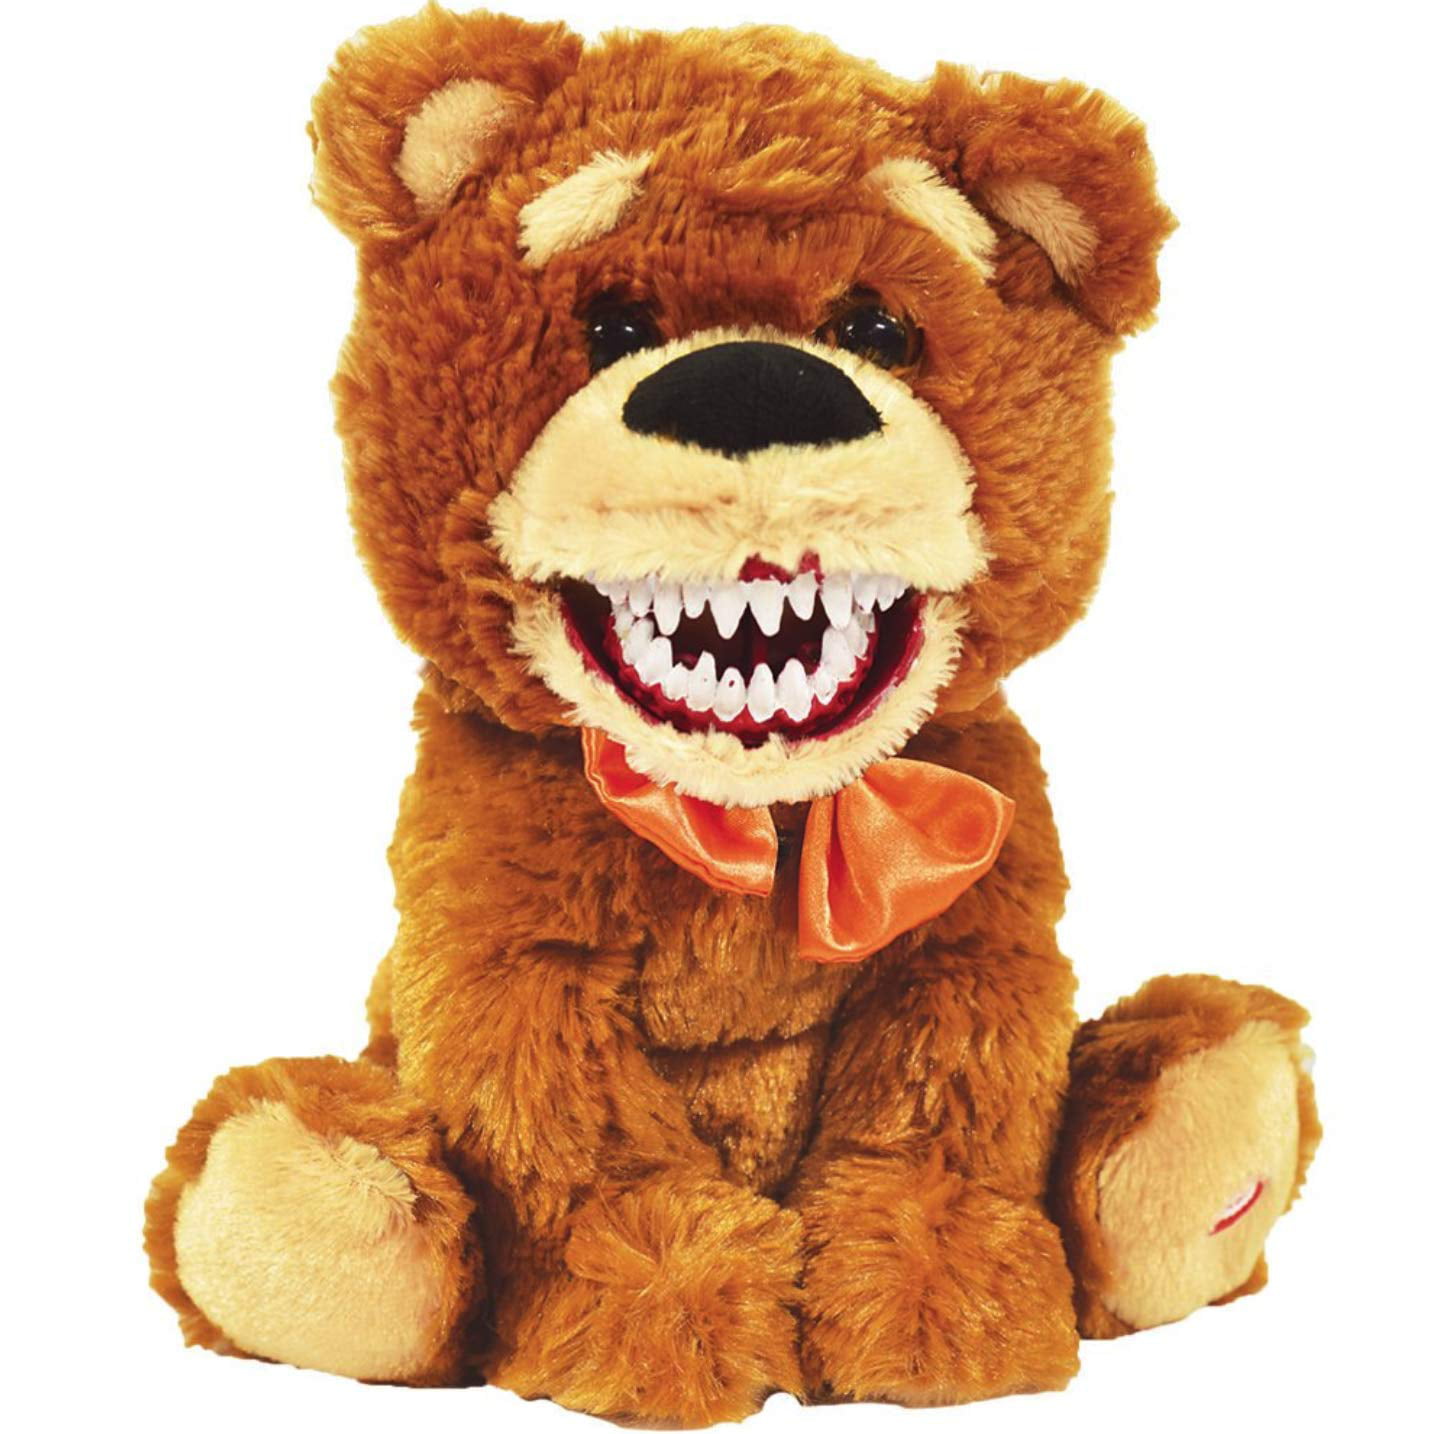 cute and scary stuffed animals